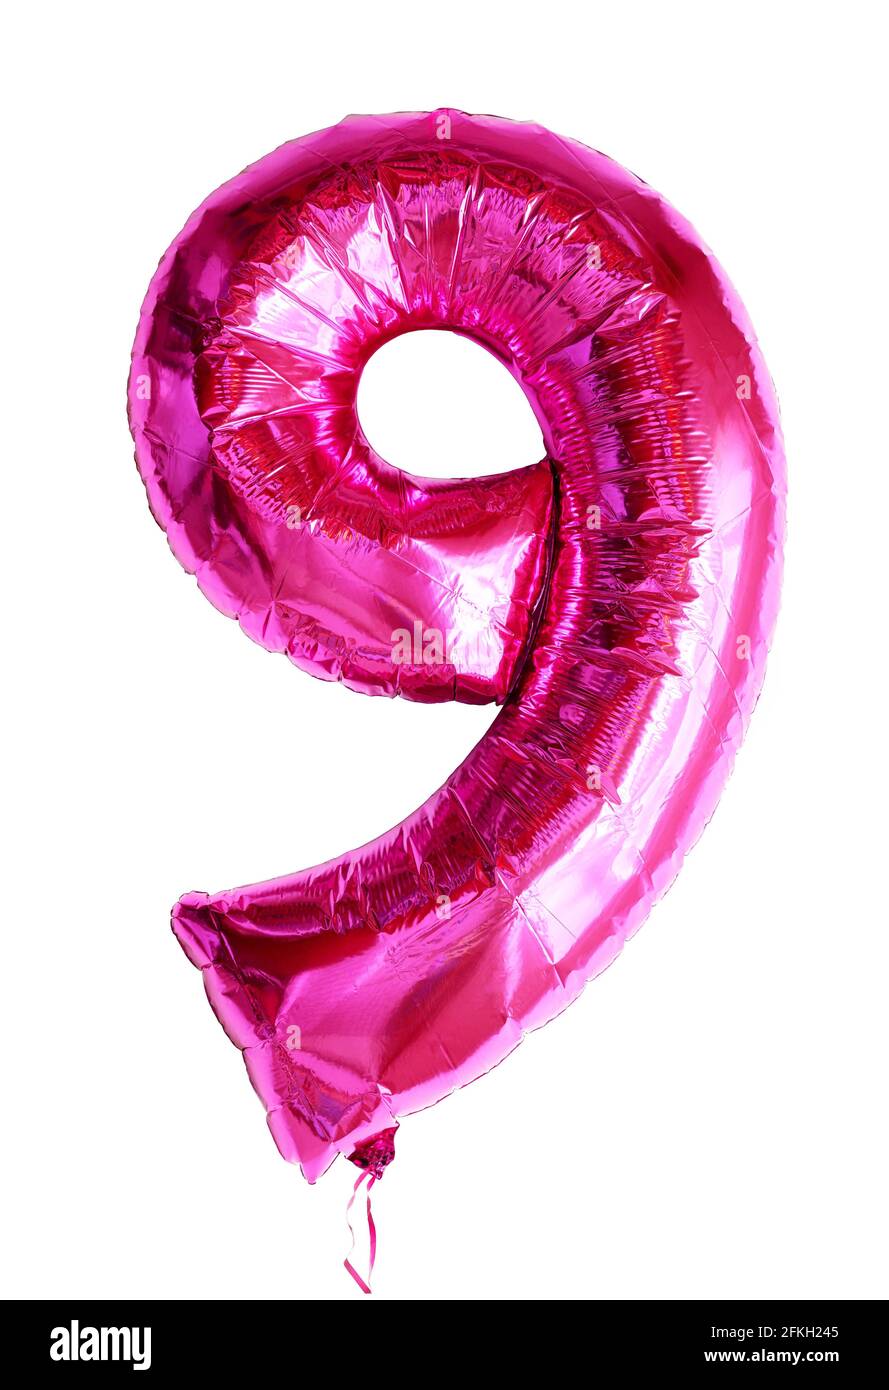 Foil balloon number 9 isolated on white background, pink numeral Nine made as inflatable balloon number for party. Shiny metallic flying figure 9 for Stock Photo